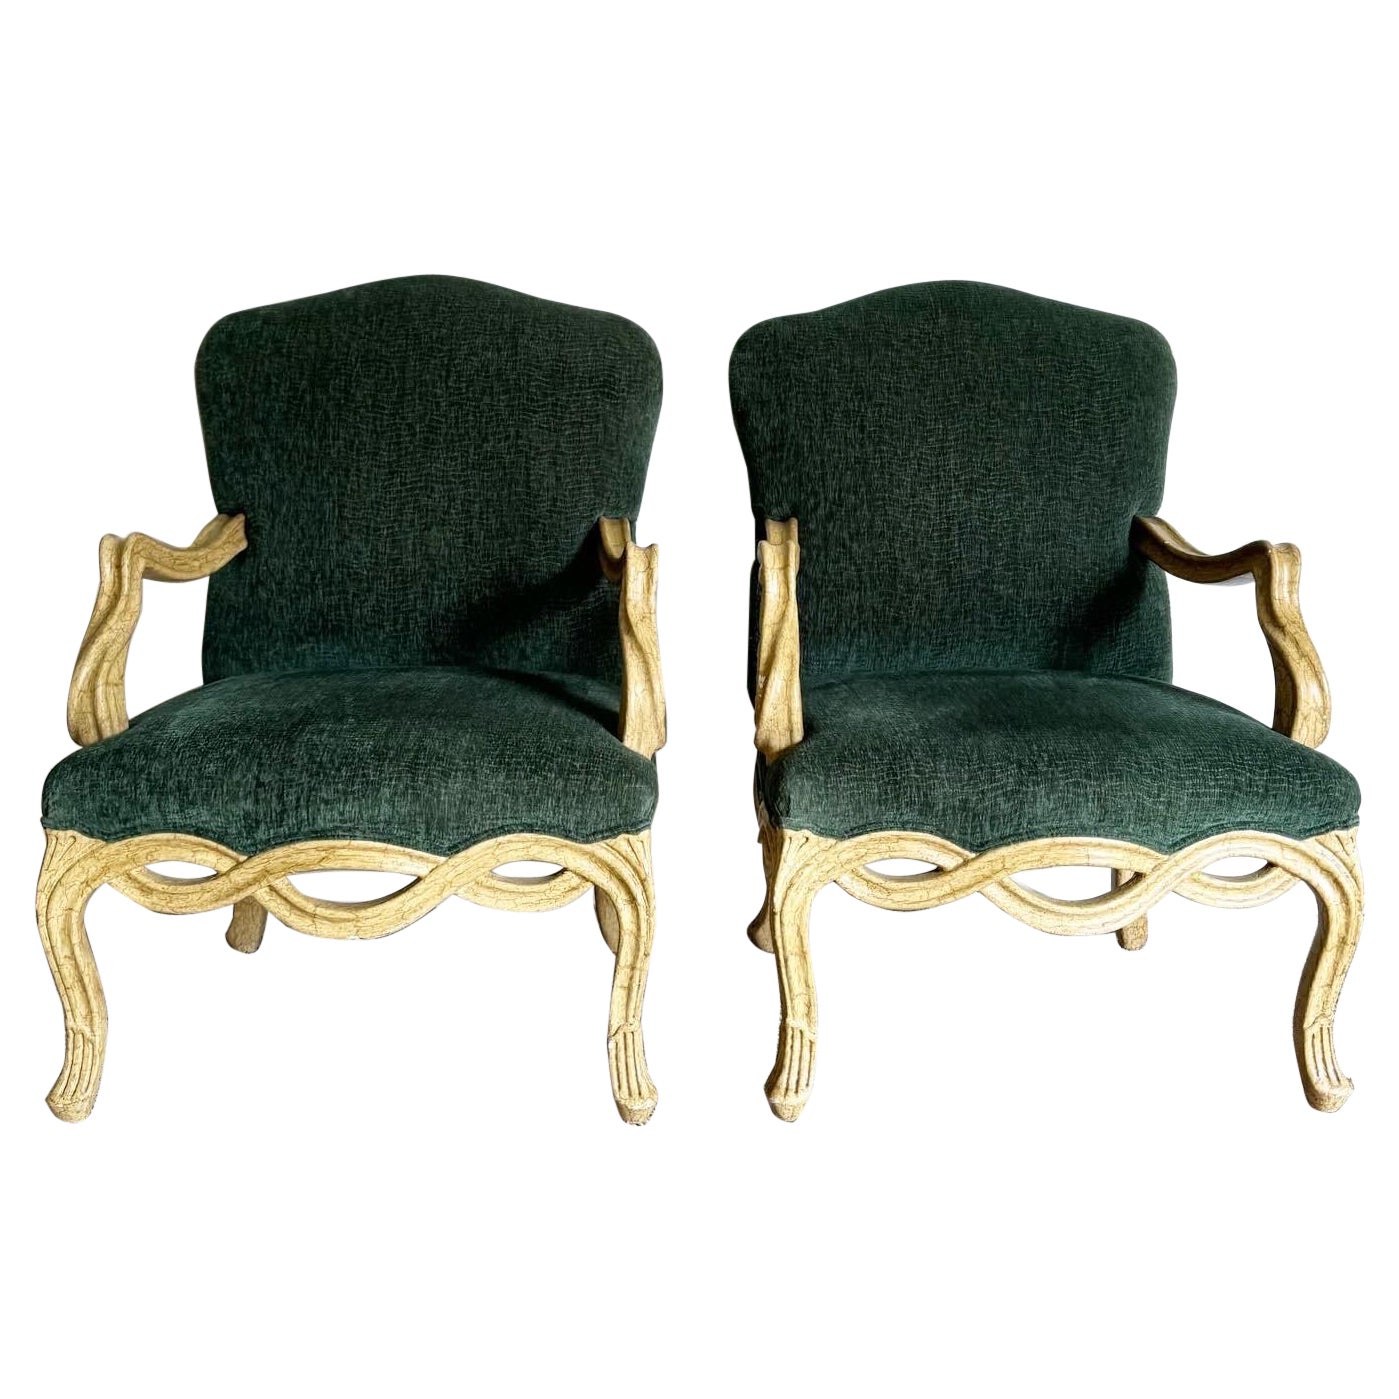 French Provincial Style Green Arm Chairs With Twisting Wooden Frame - a Pair For Sale